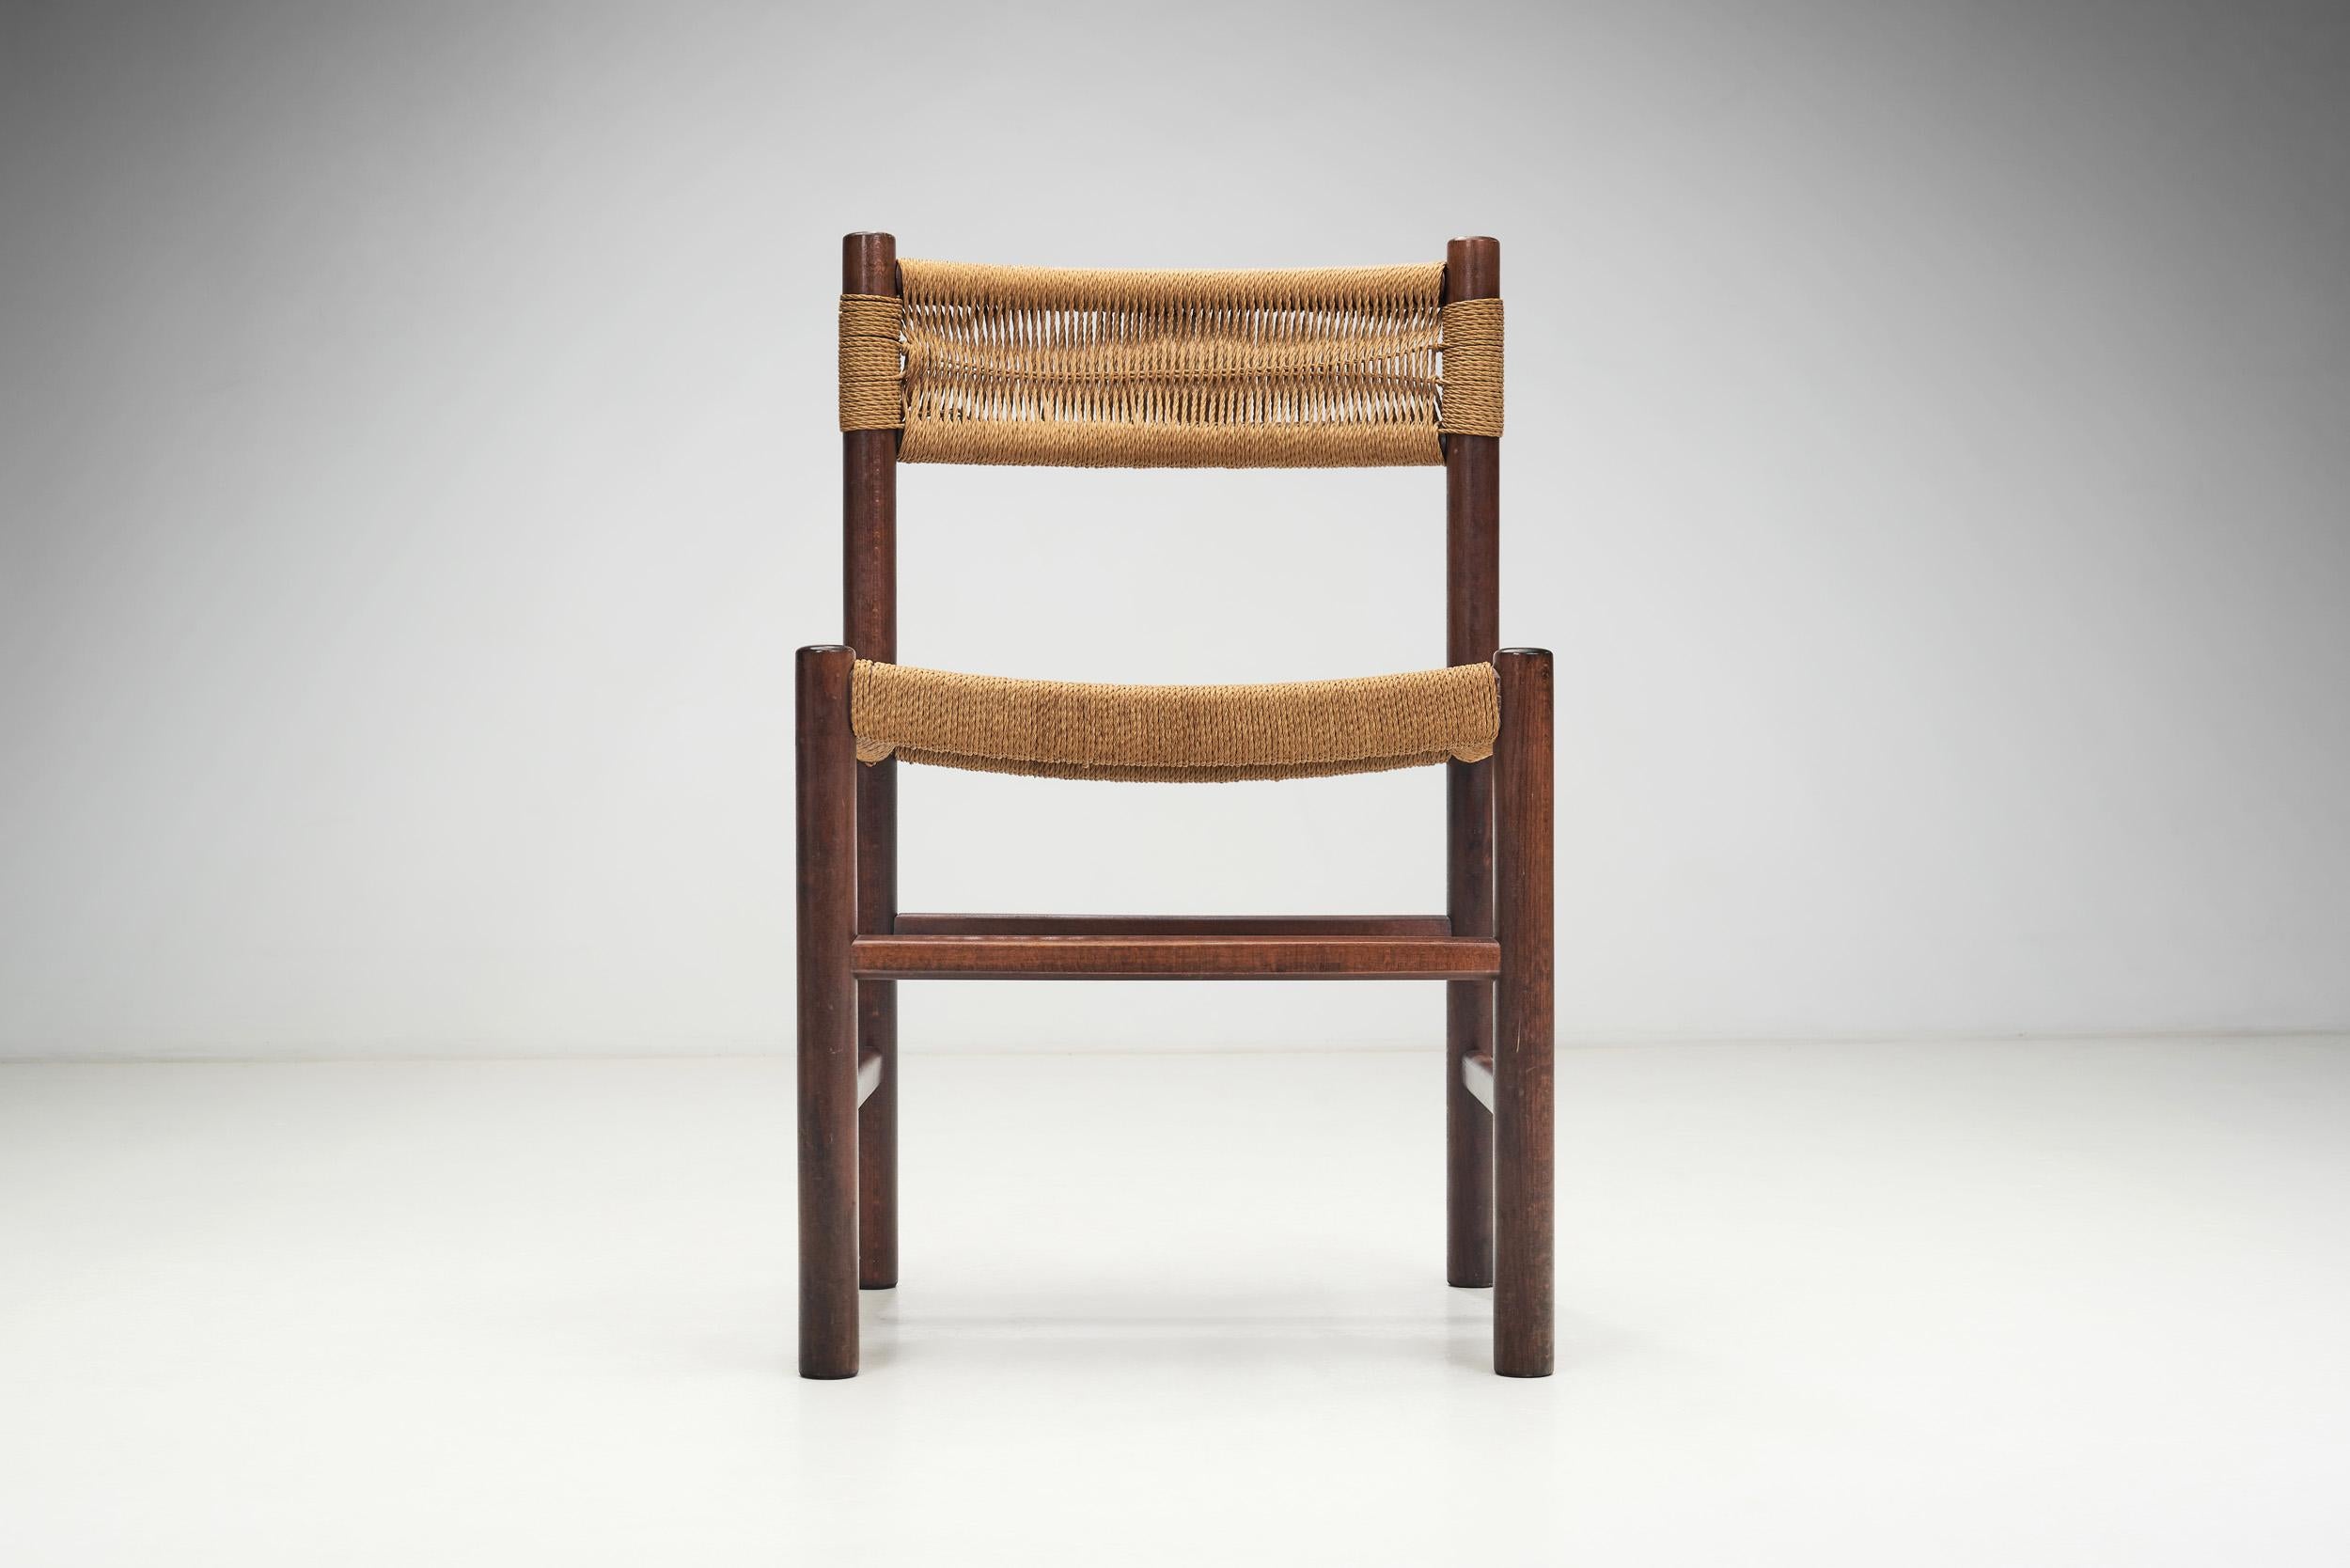 Mid-20th Century “Dordogne” style Chairs with Woven Papercord Seats and Backs, Europe ca 1960s